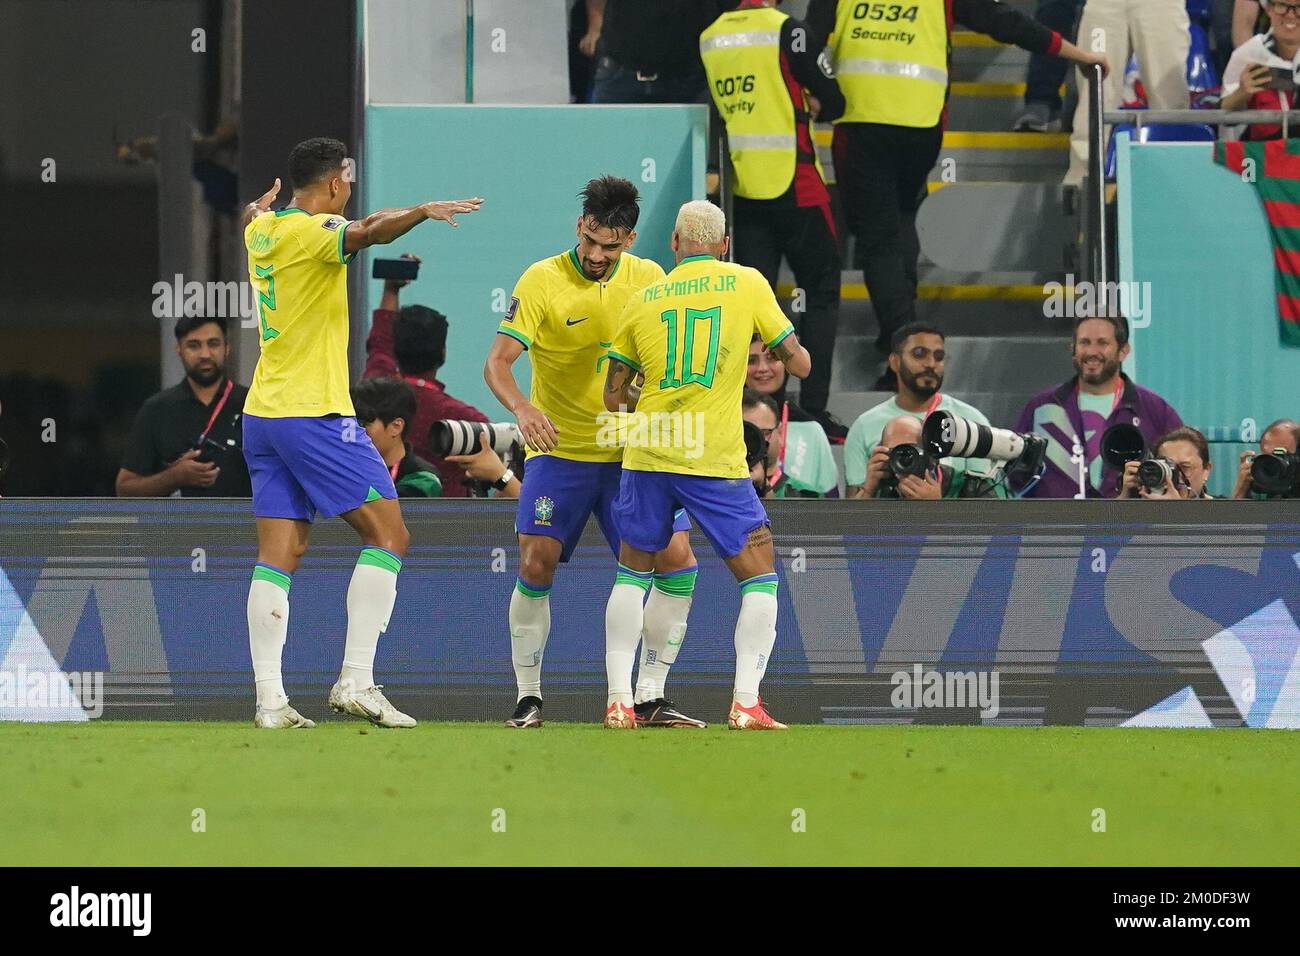 DOHA, QATAR - DECEMBER 5: Player of Brazil Lucas Paquetá celebrates with his teammates Danilo and Neymar after scoring a goal during the FIFA World Cup Qatar 2022 Round of 16 match between Brazil and South Korea at Stadium 974 on December 5, 2022 in Doha, Qatar. (Photo by Florencia Tan Jun/PxImages) Stock Photo